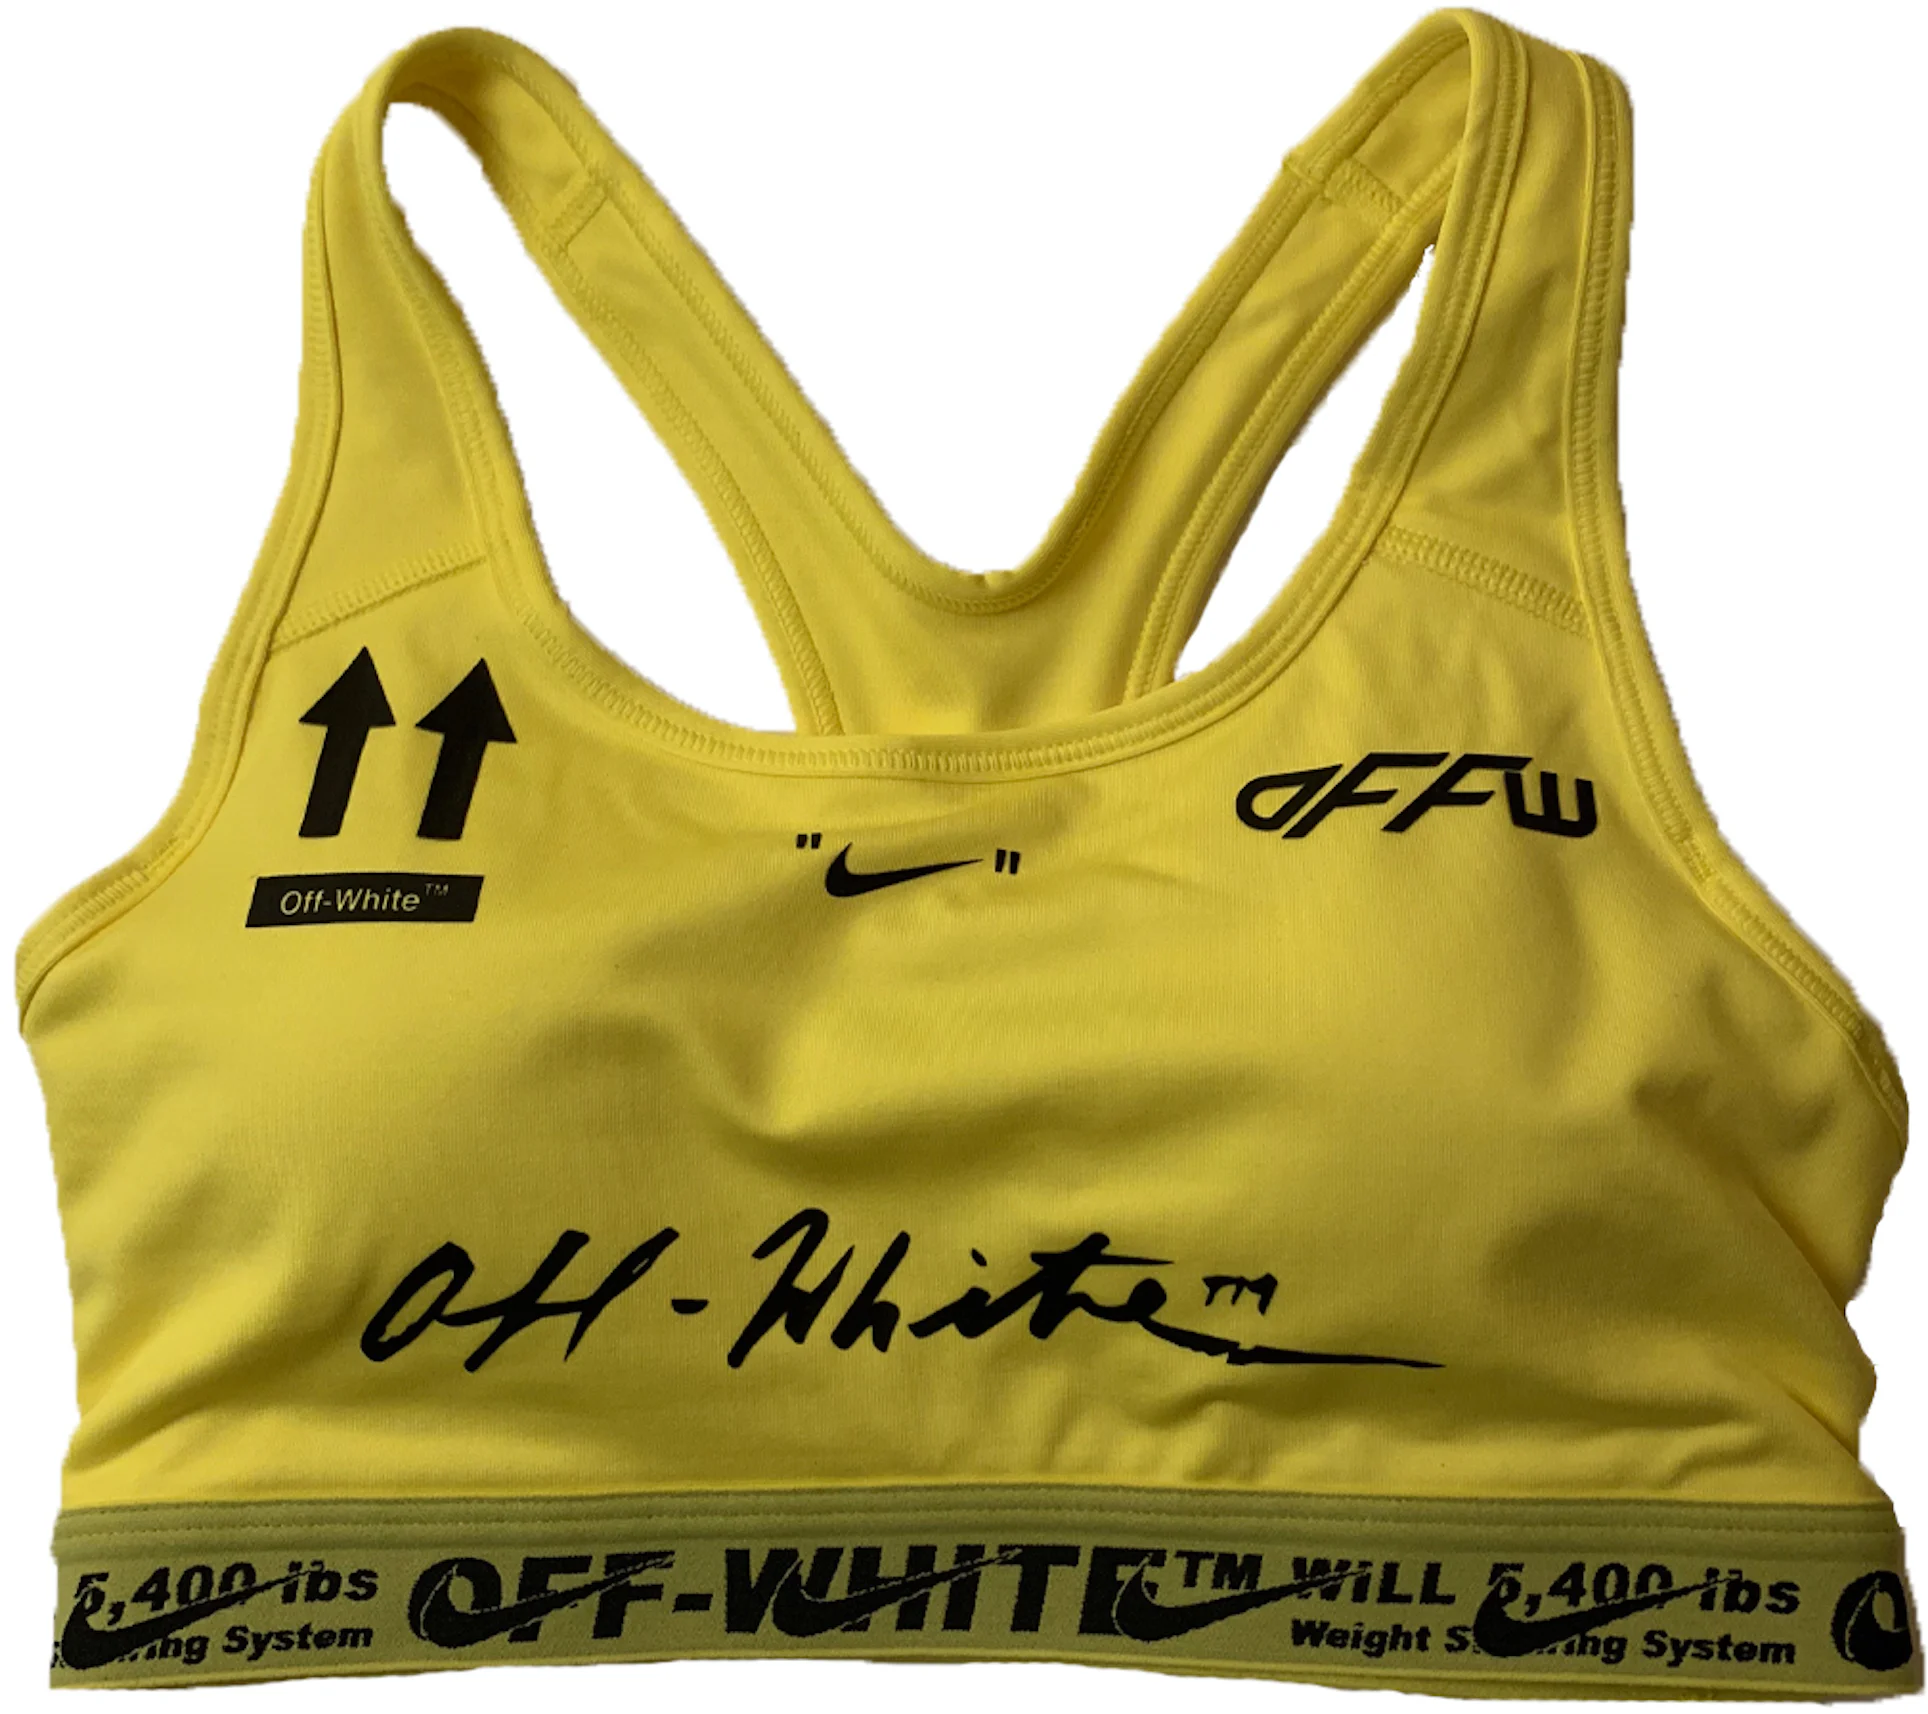 https://images.stockx.com/images/OFF-WHITE-Nike-Sports-Bra-Yellow.png?fit=fill&bg=FFFFFF&w=1200&h=857&fm=webp&auto=compress&dpr=2&trim=color&updated_at=1698227356&q=60